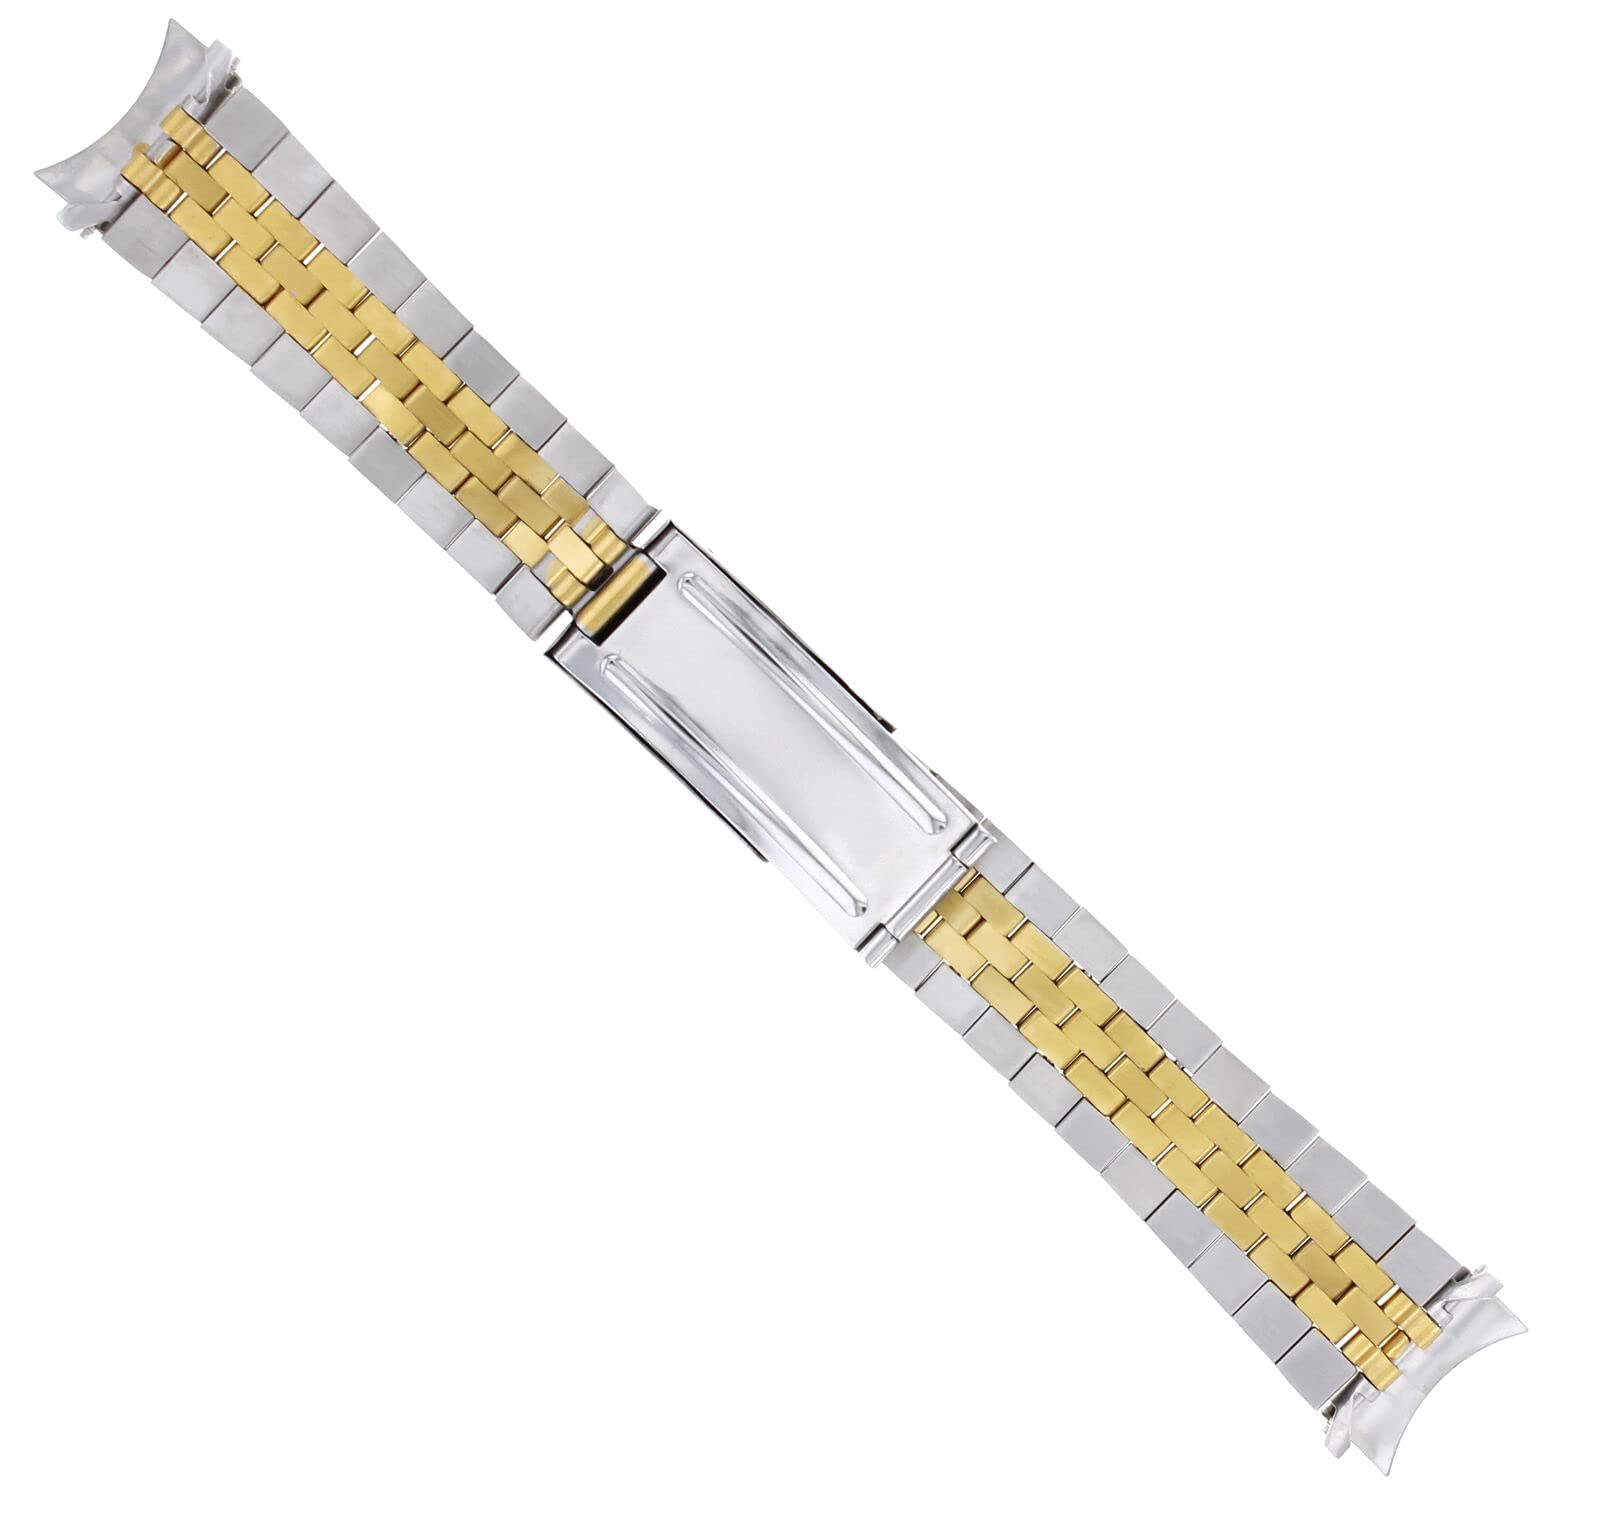 Ewatchparts 20MM JUBILEE WATCH BAND COMPATIBLE WITH ROLEX DATEJUST 16013,16200,16013 16233 16234 TWO TON